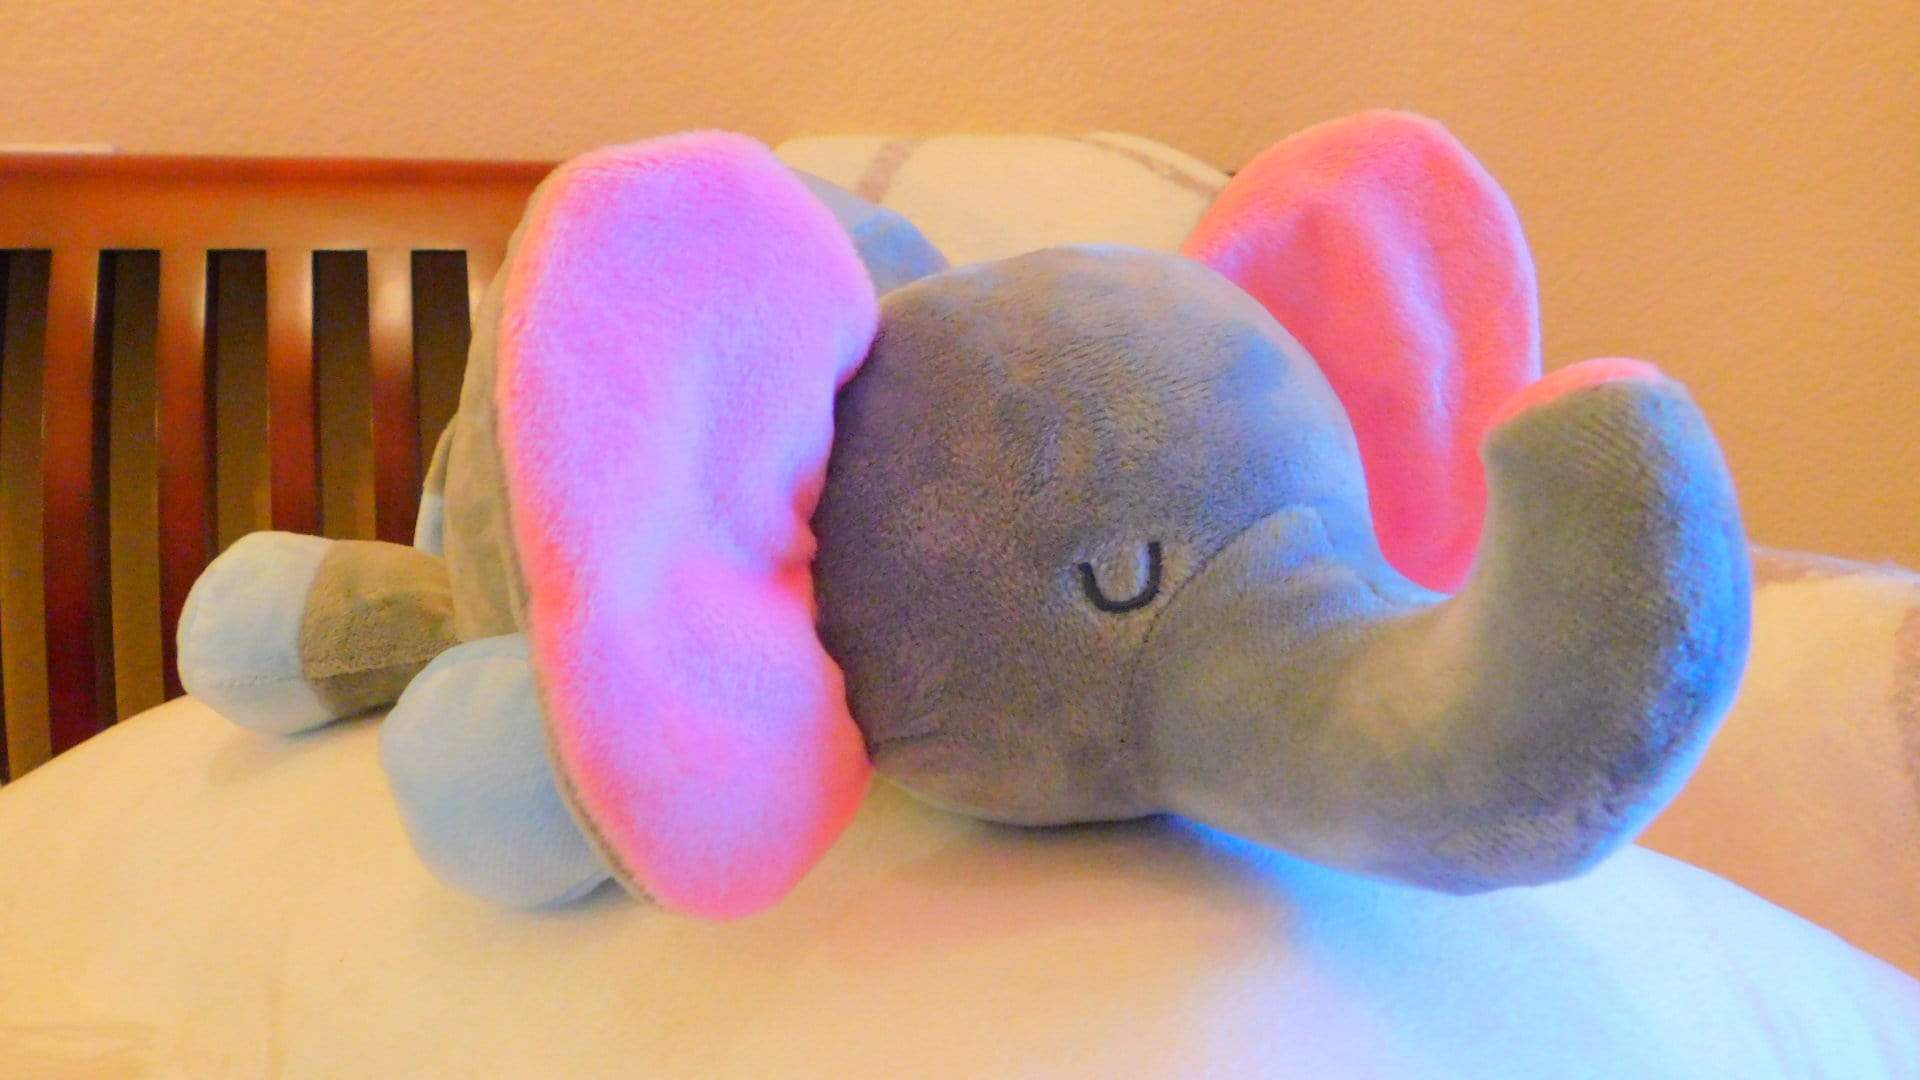 Soothing Elephant with Light & Sound - Plush Elephant for Baby Baby Projector with Sound